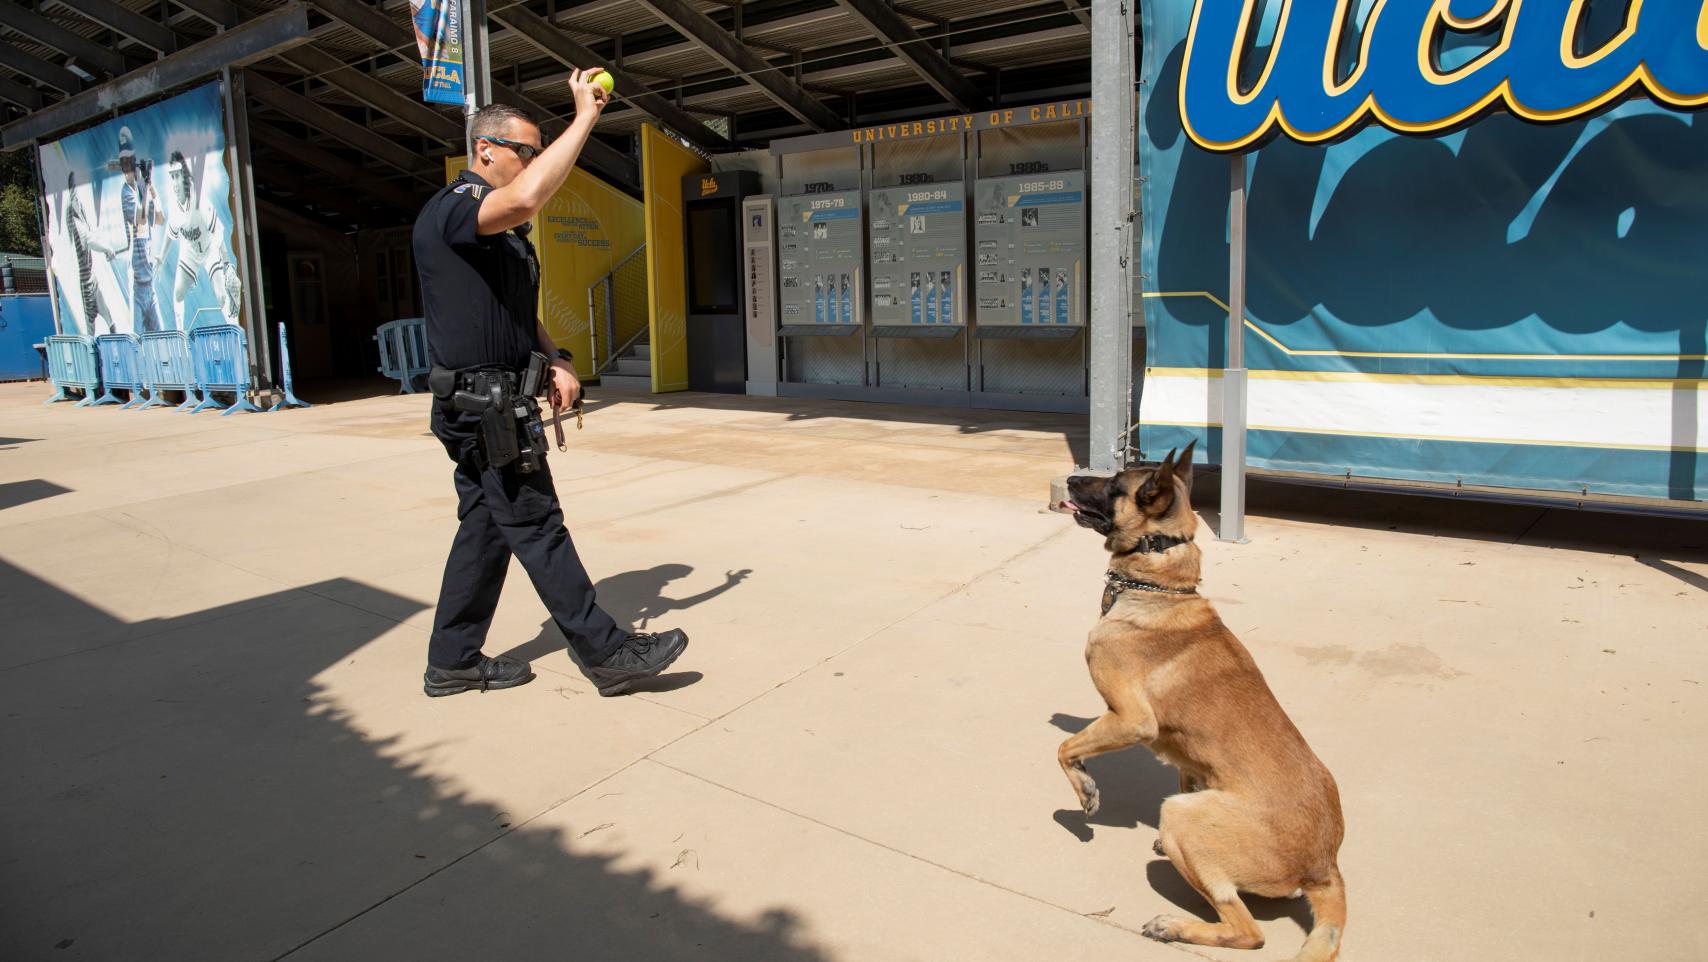 UCPD K9 officer playing with K9 outside of Pauley Pavilion